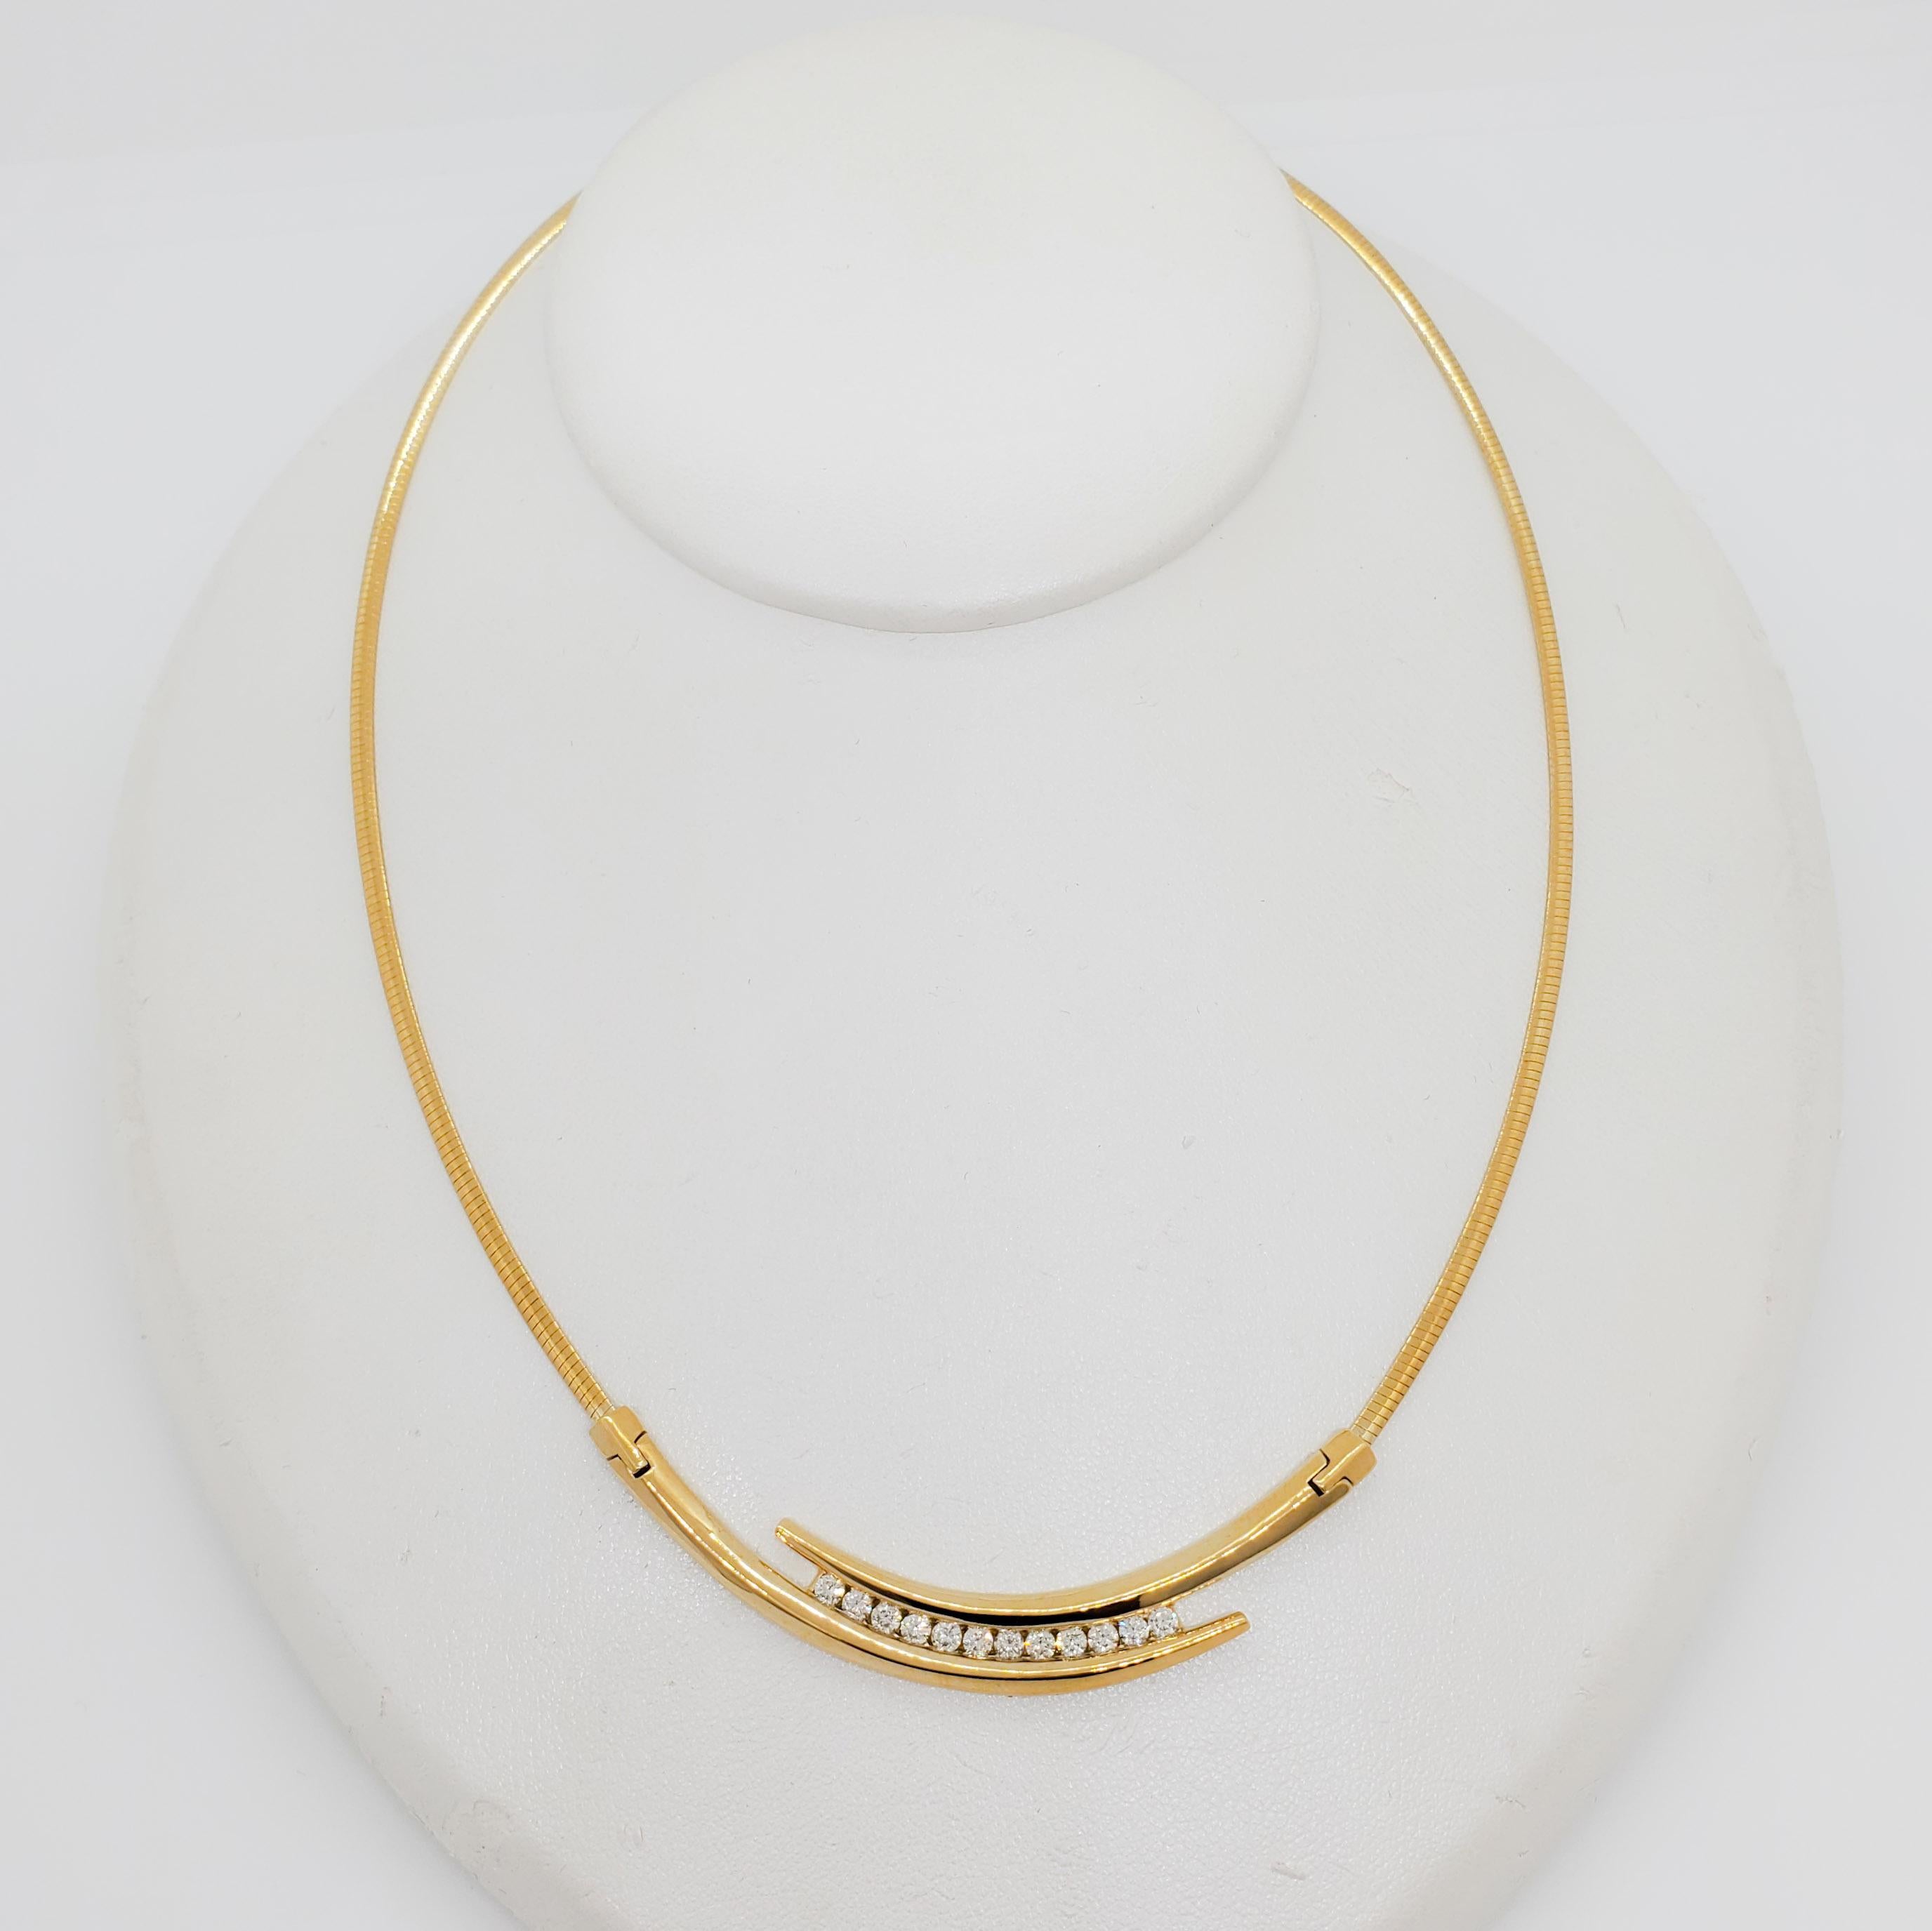 Gorgeous necklace with 0.69 ct. good quality, white, and bright diamond rounds.  Handmade 14k yellow gold mounting.  Length is 15